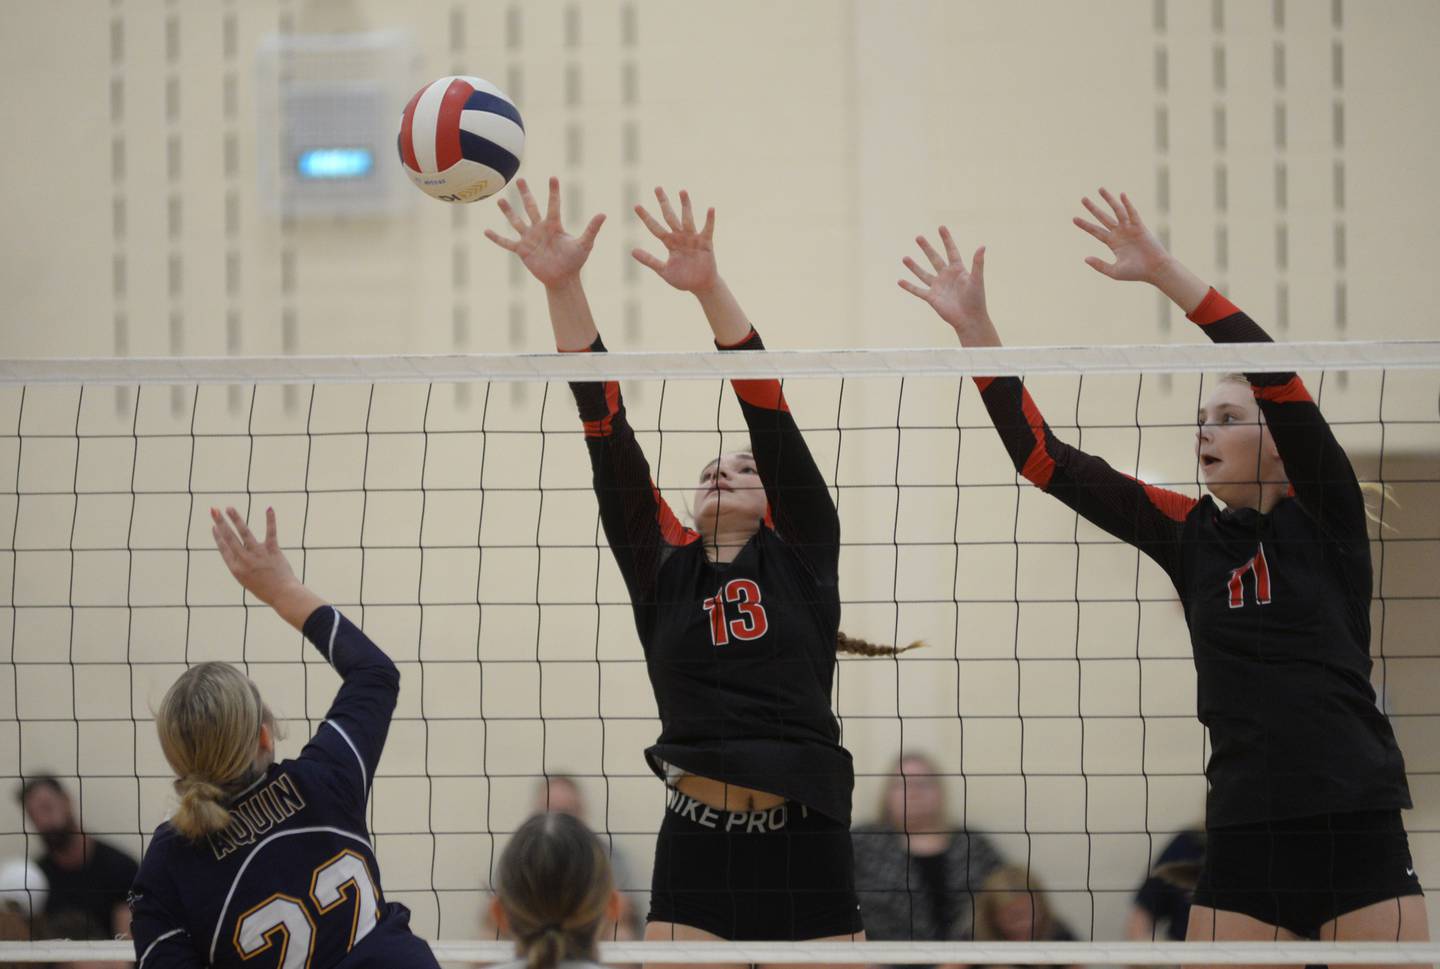 Erie-Prophetstown's Kennedy Buck (13) and Lauren Abbott (11) reach to try and block a spike by Freeport Aquin's Meghan Carlisle during the Oregon High School's 2023 Volleyball Tournament on Friday, Sept. 1, 2023 at the Blackhawk Center in Oregon.